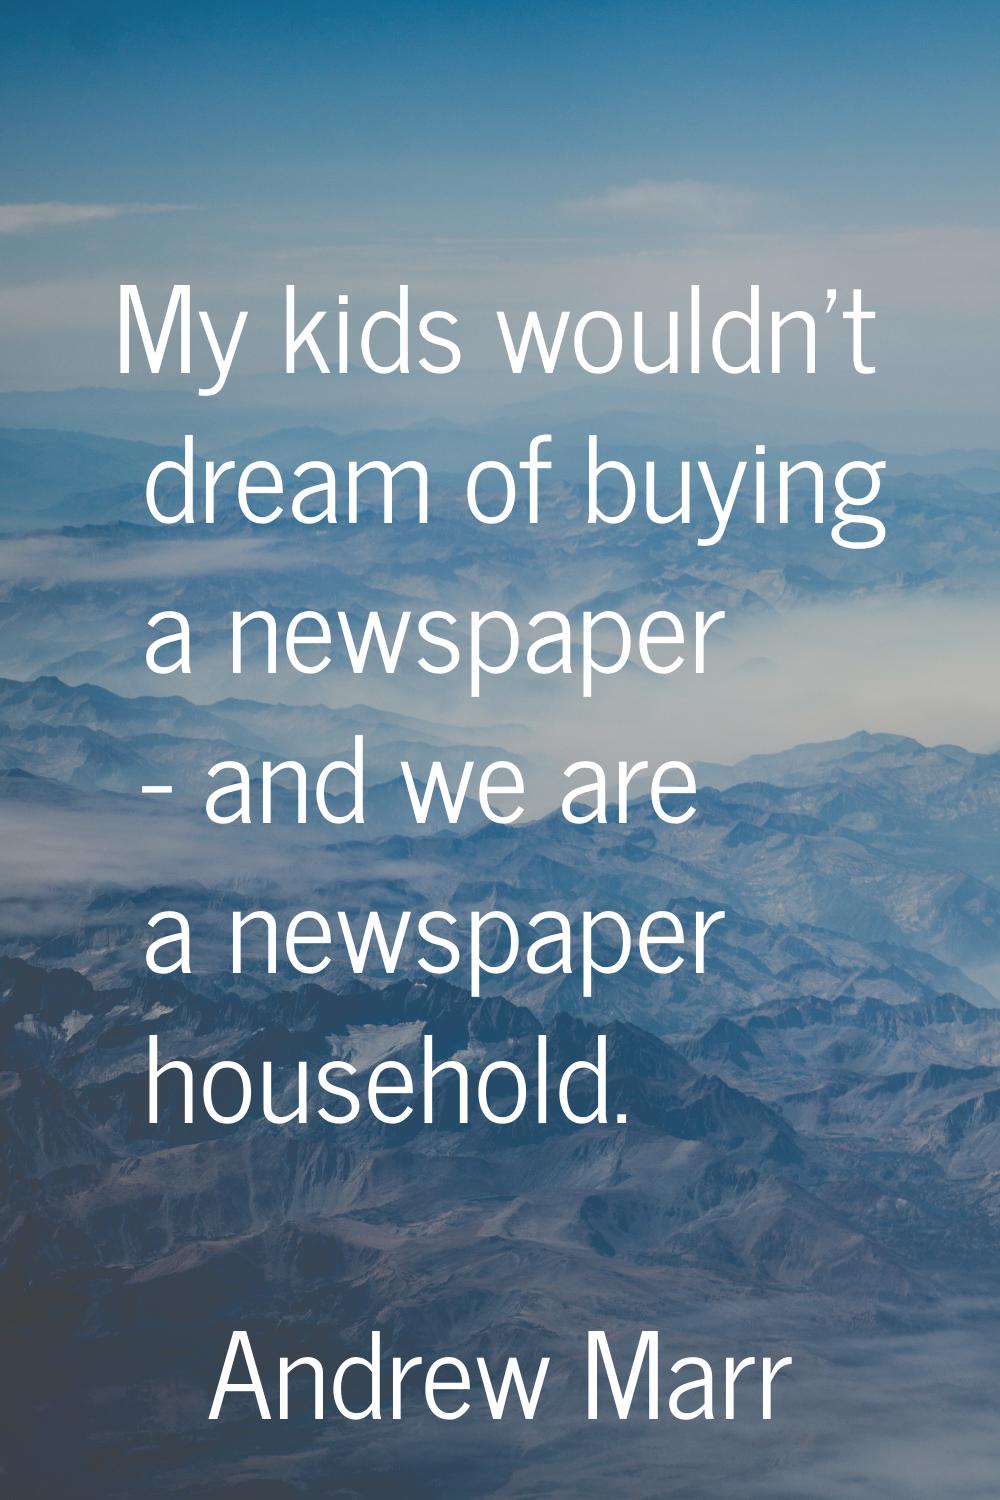 My kids wouldn't dream of buying a newspaper - and we are a newspaper household.